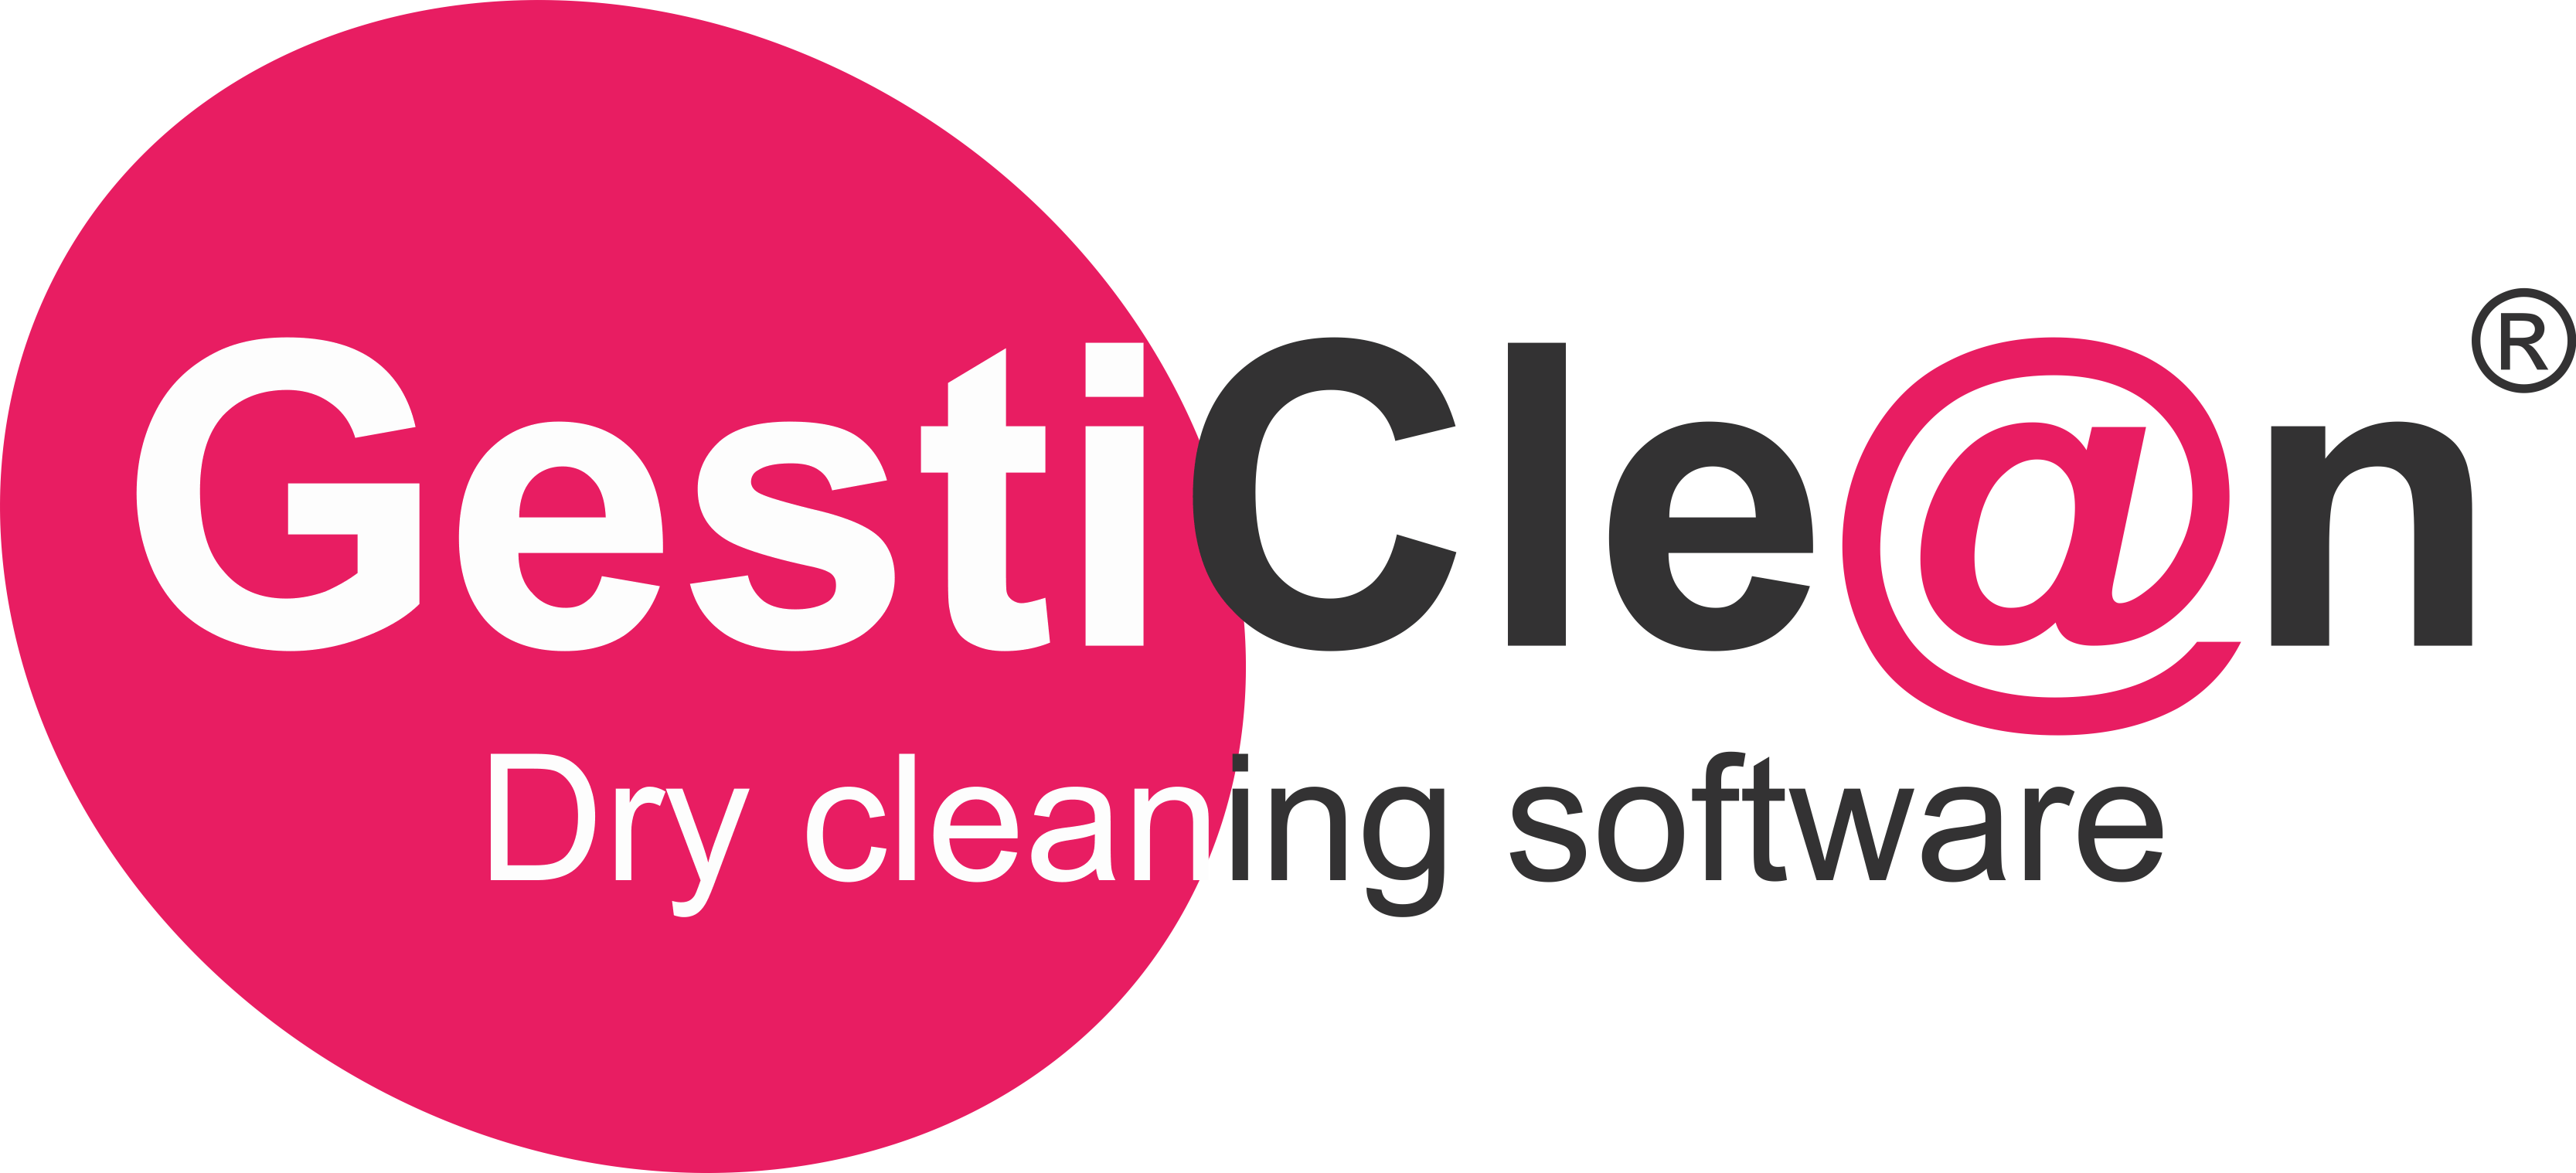 GestiClean logo, dry cleaning management software